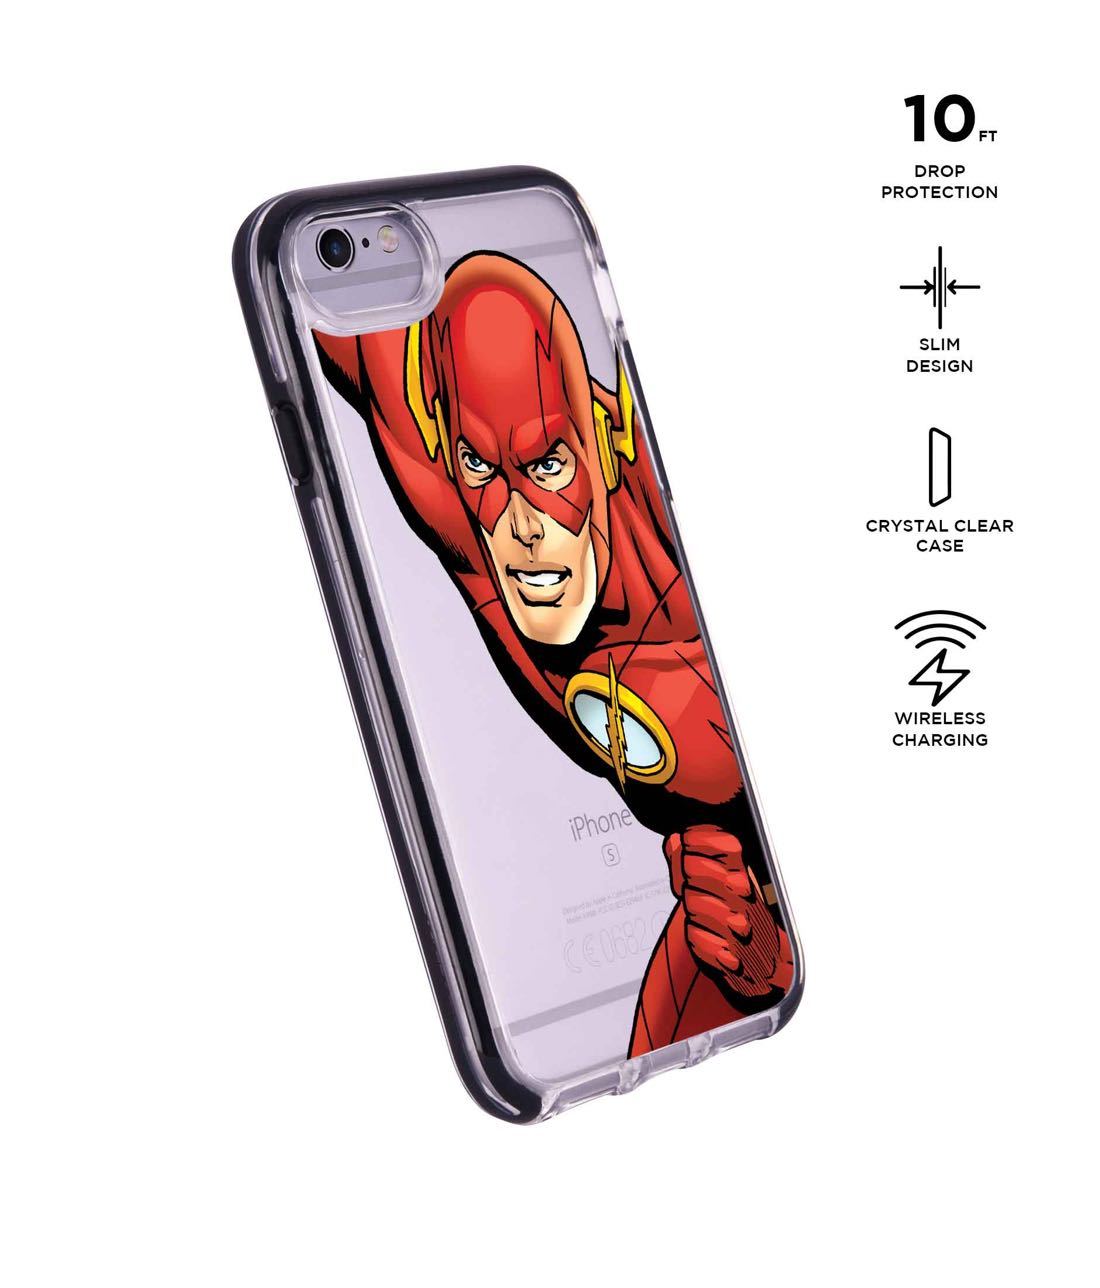 Fierce Flash - Extreme Phone Case for iPhone 6 Plus